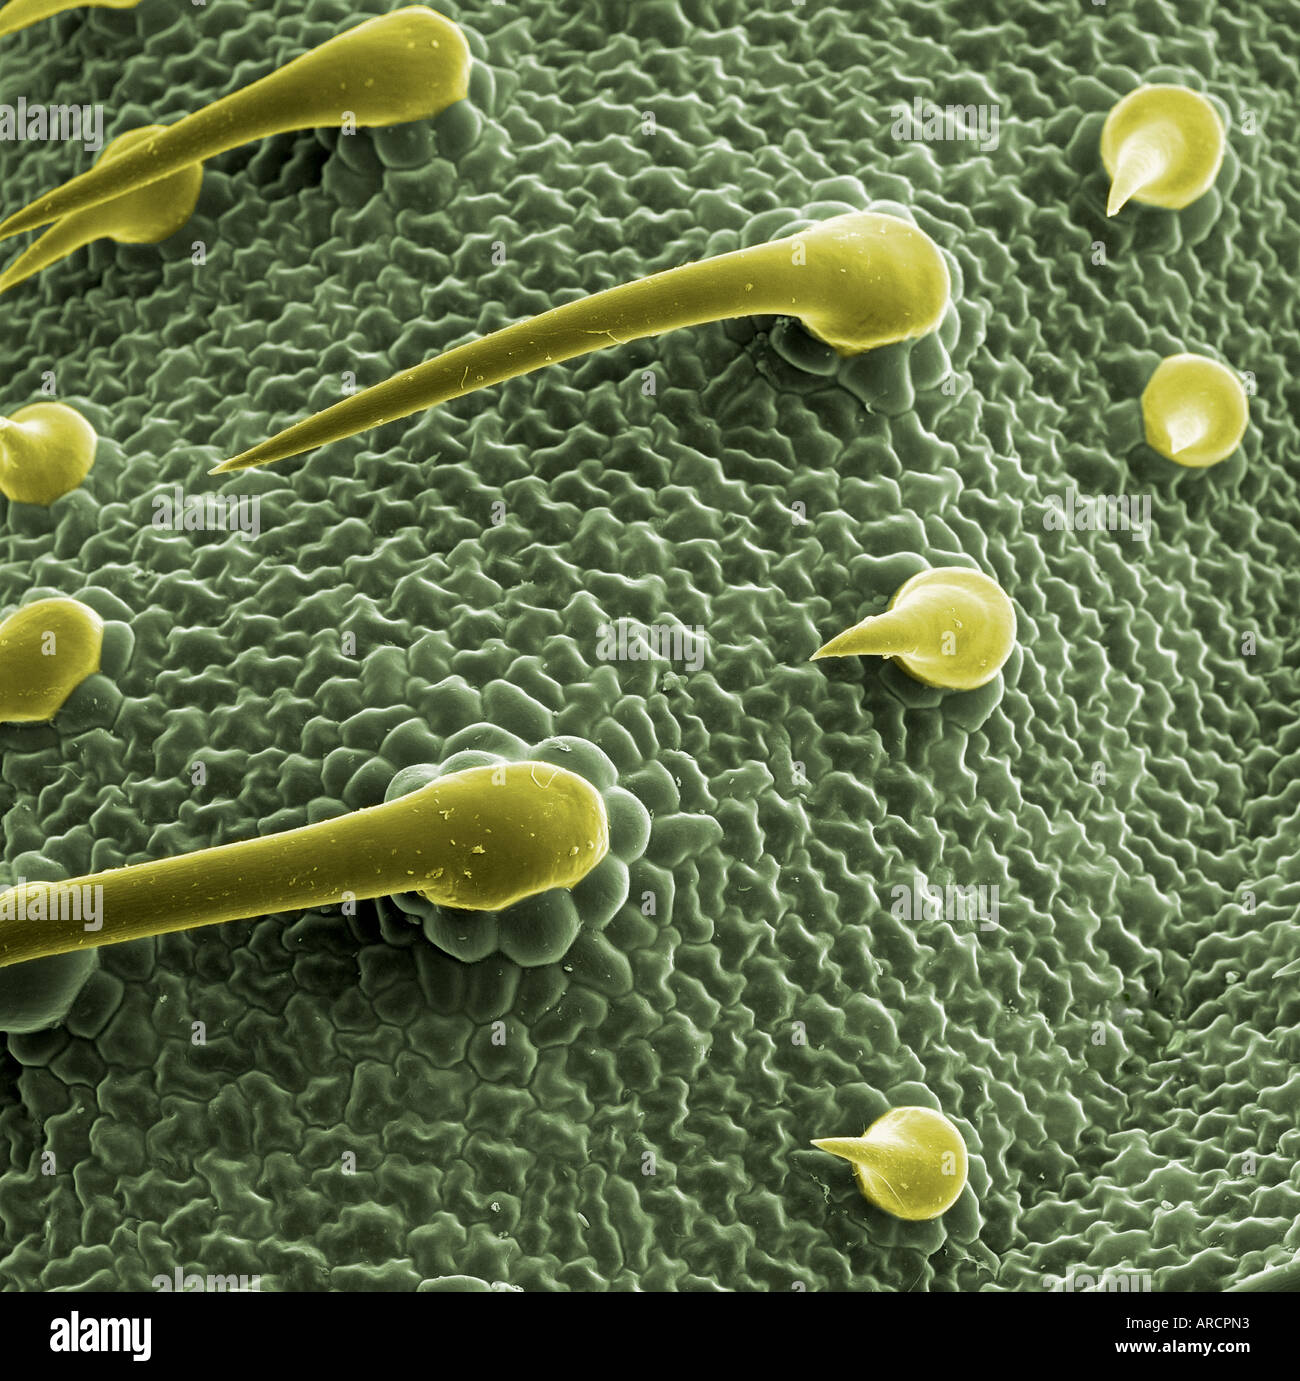 A scanning electron microscope image of Heliotropium (marine heliotrope) lower leaf surface, showing trichomes. Stock Photo